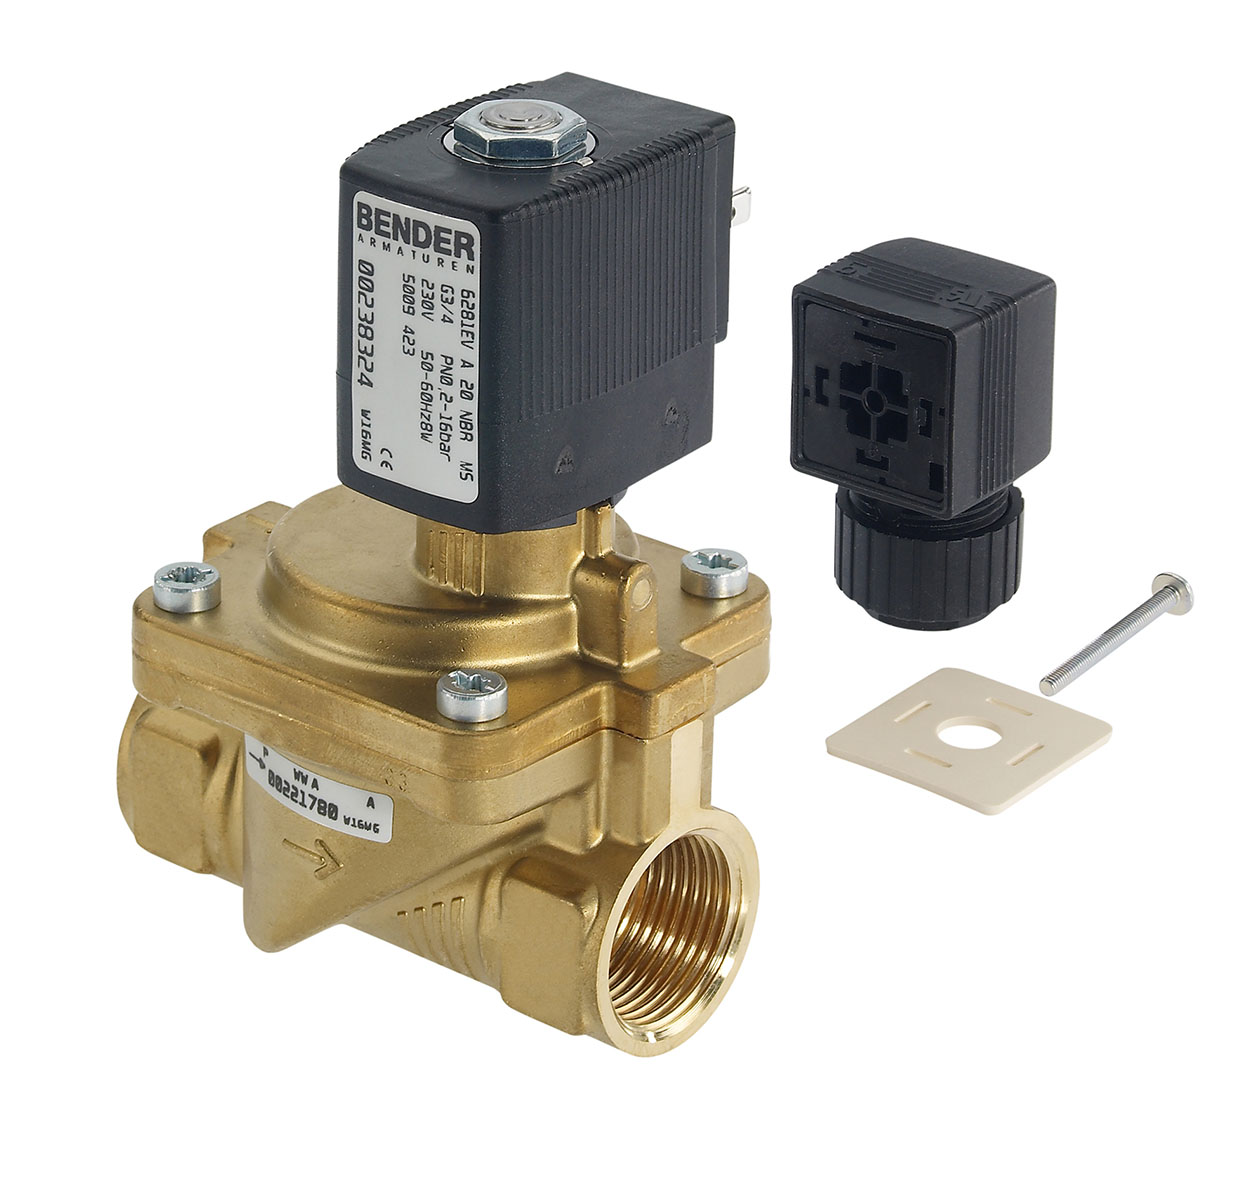 5009437 - 2/2 way solenoid valve normally closed for fluids and compressed air Type 3; female thread